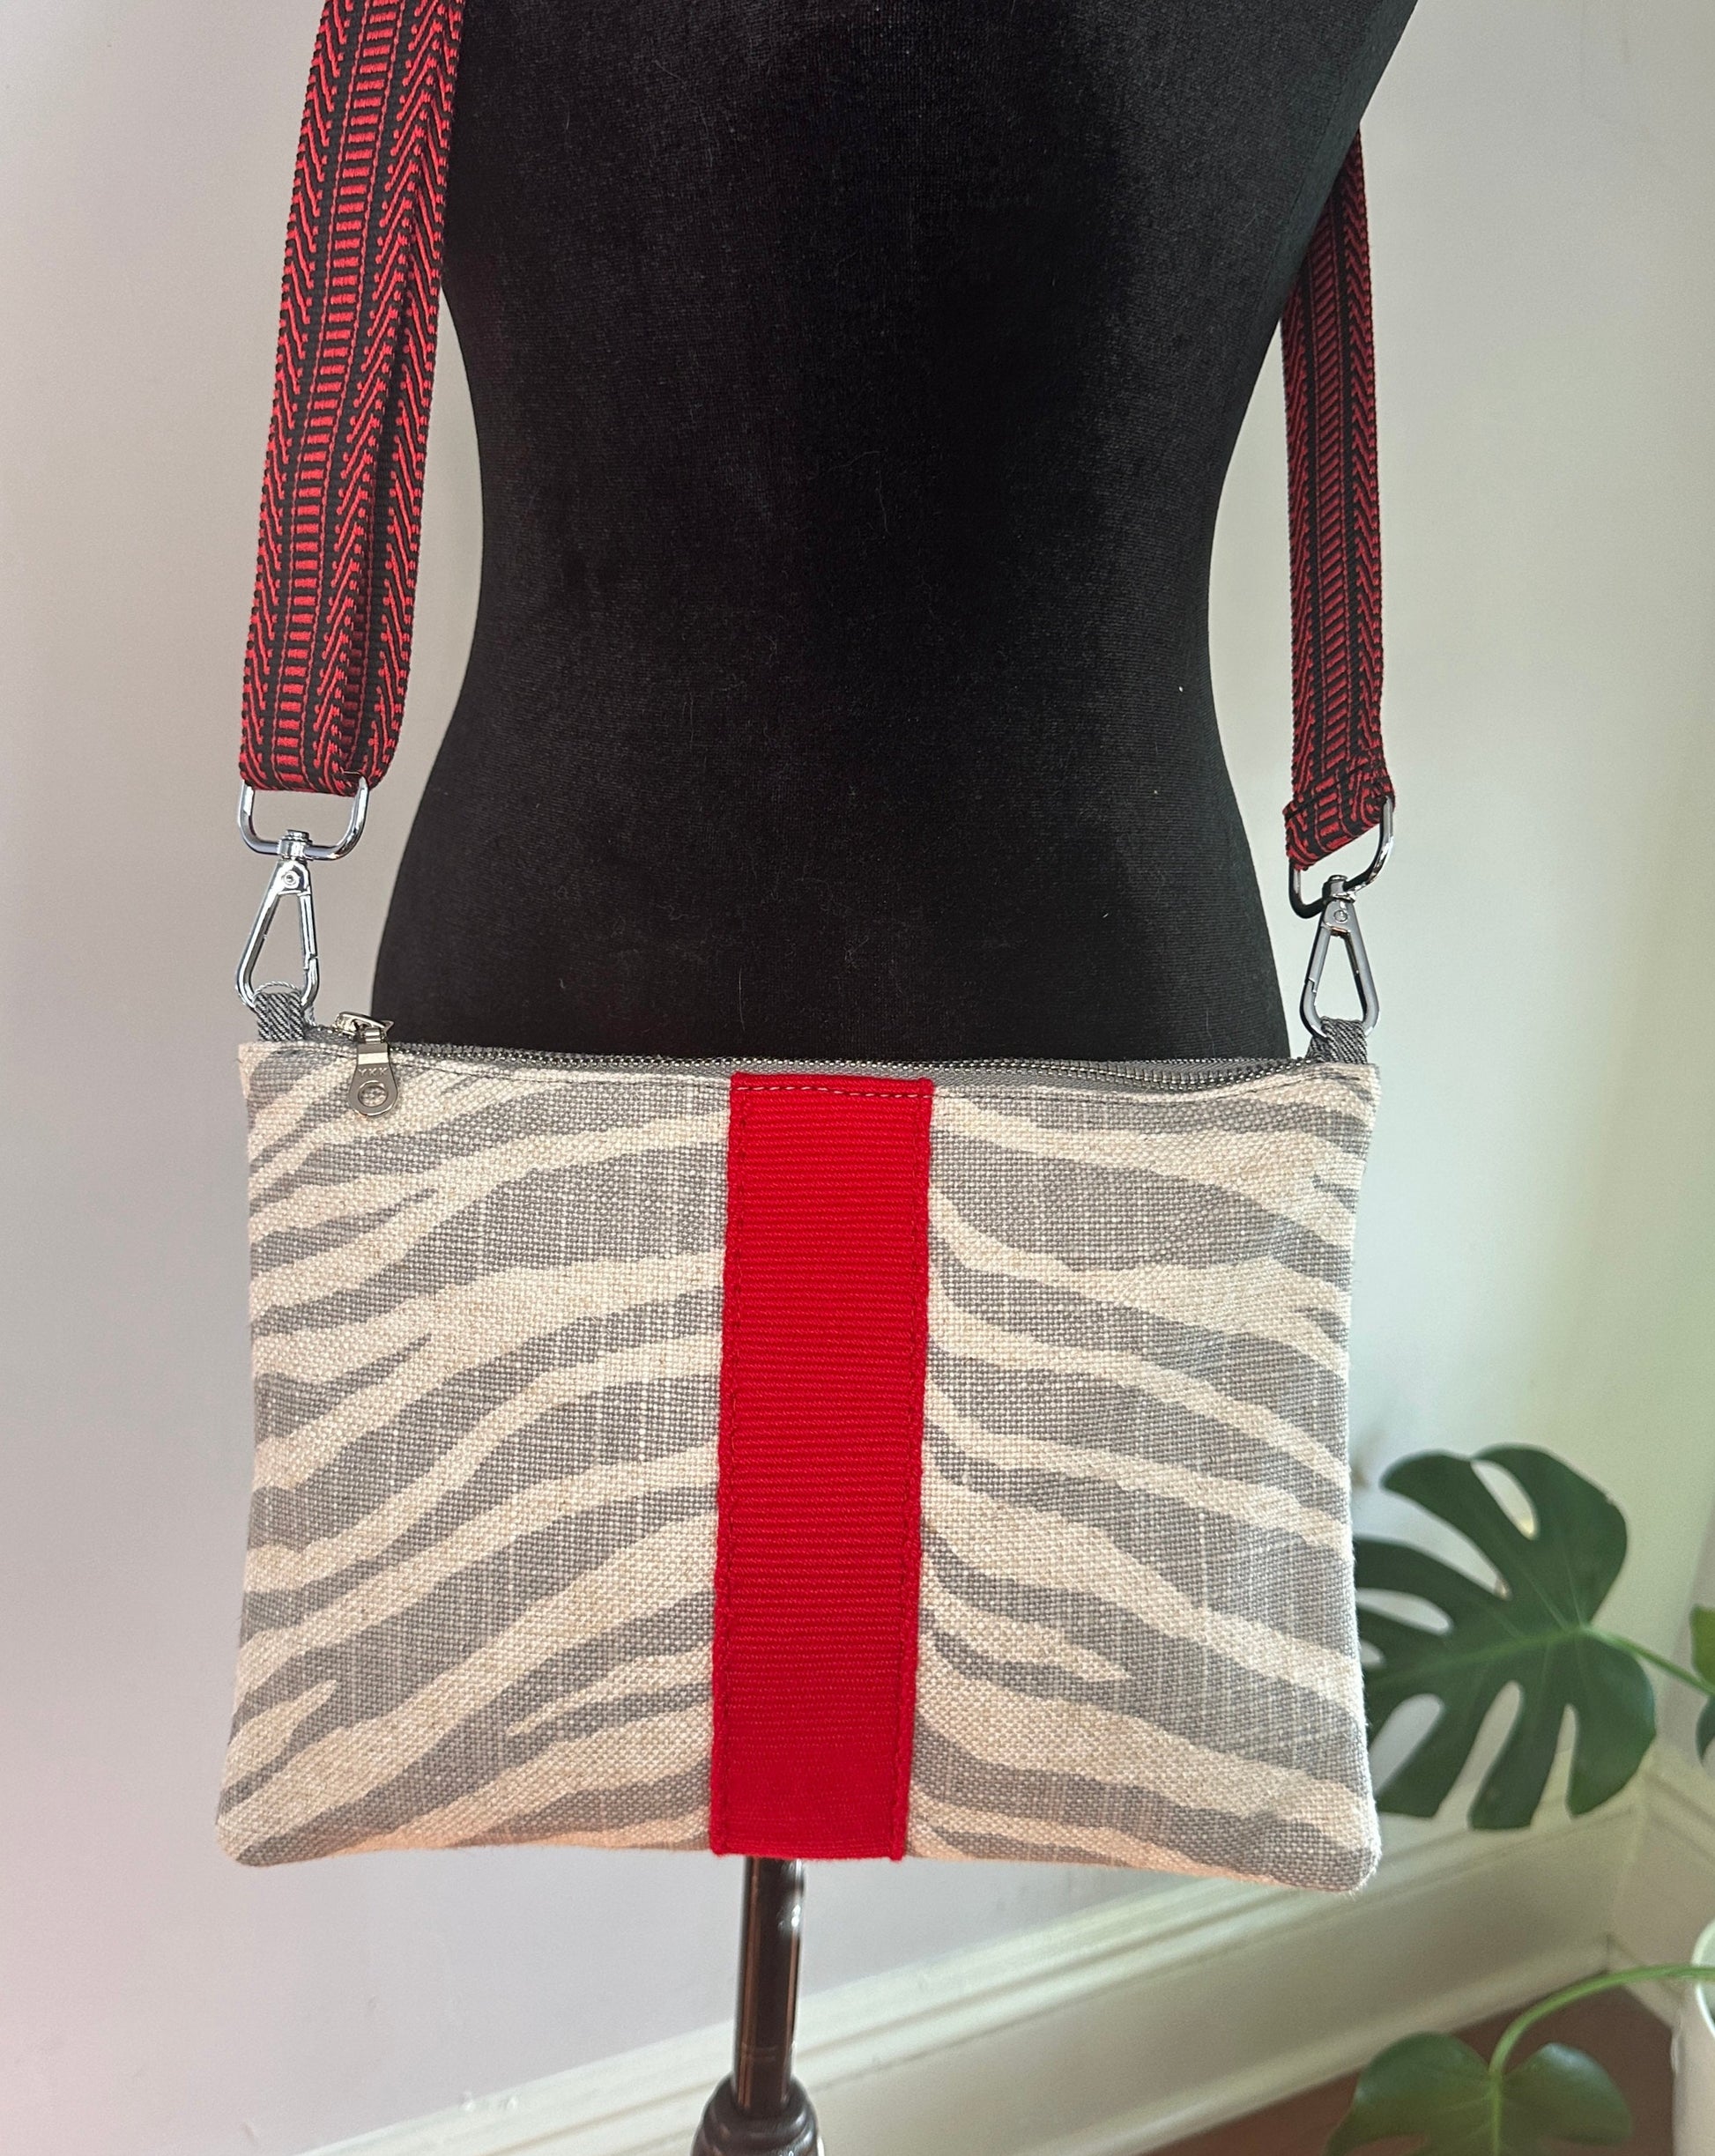 Grey and Cream zebra print with red and black guitar strap webbing.